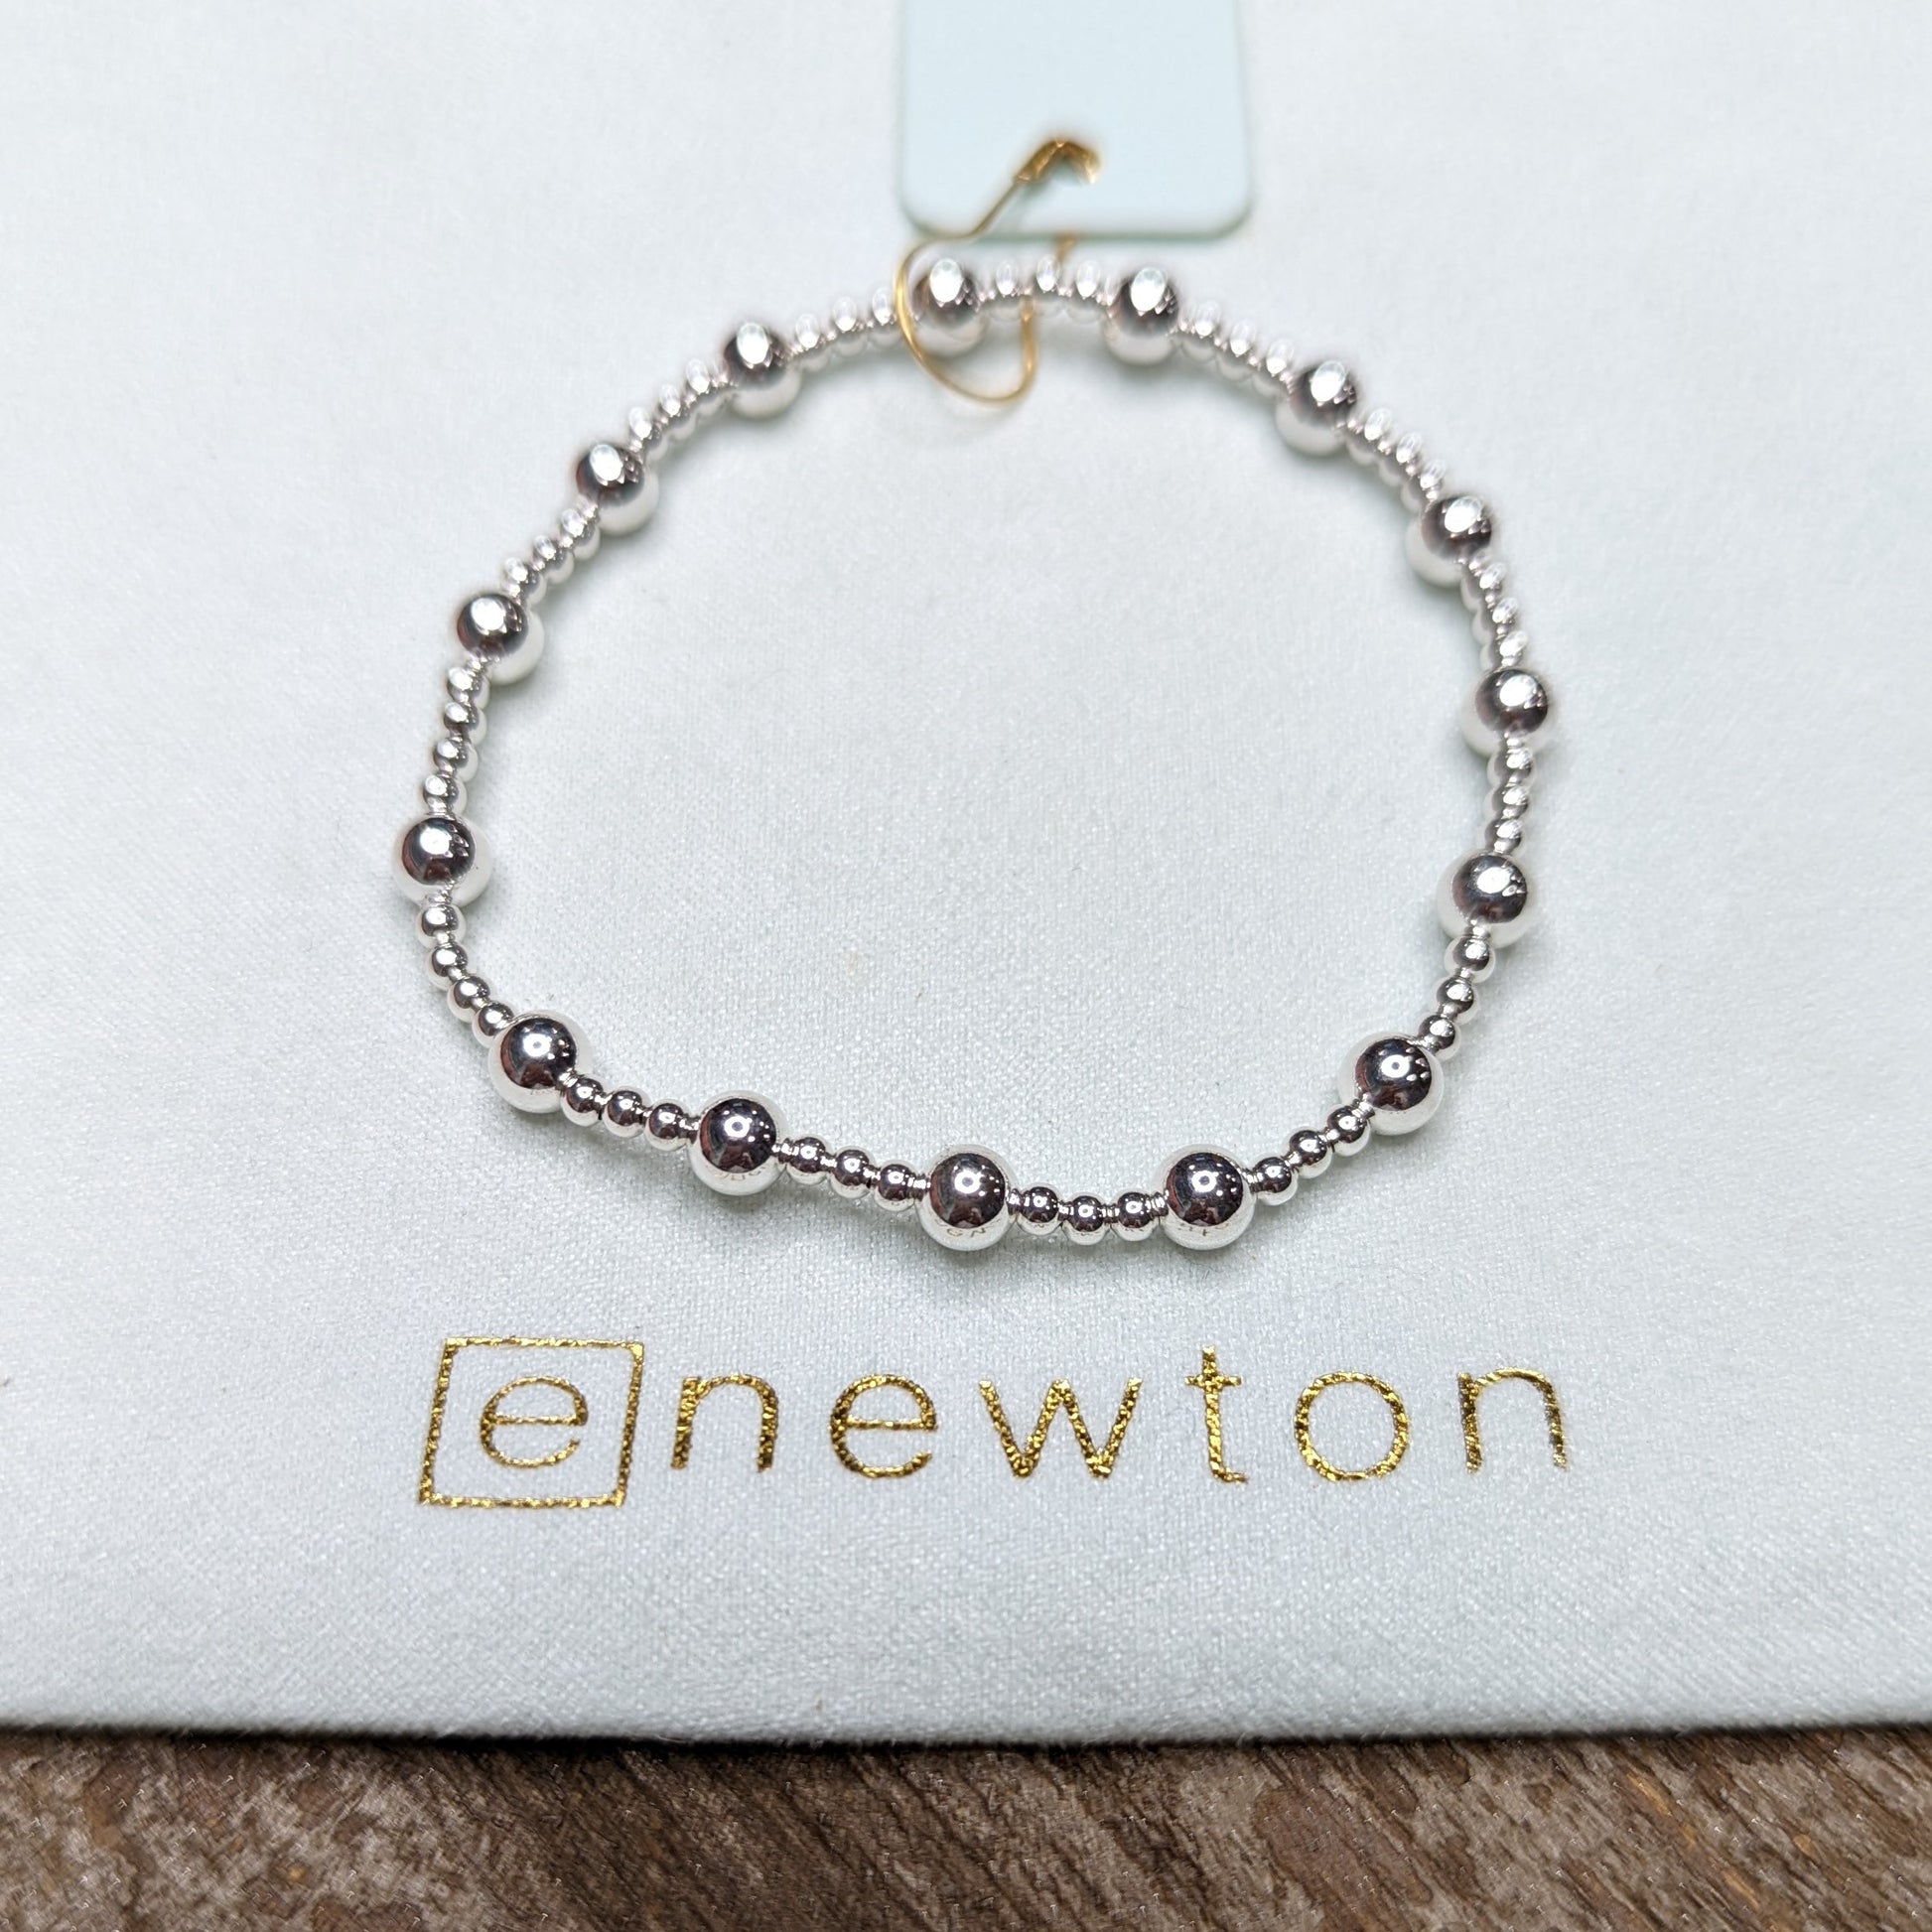 Classic sterling silver 5mm Sincerity bracelet by eNewton. Shop at The Painted Cottage in Edgewater, MD